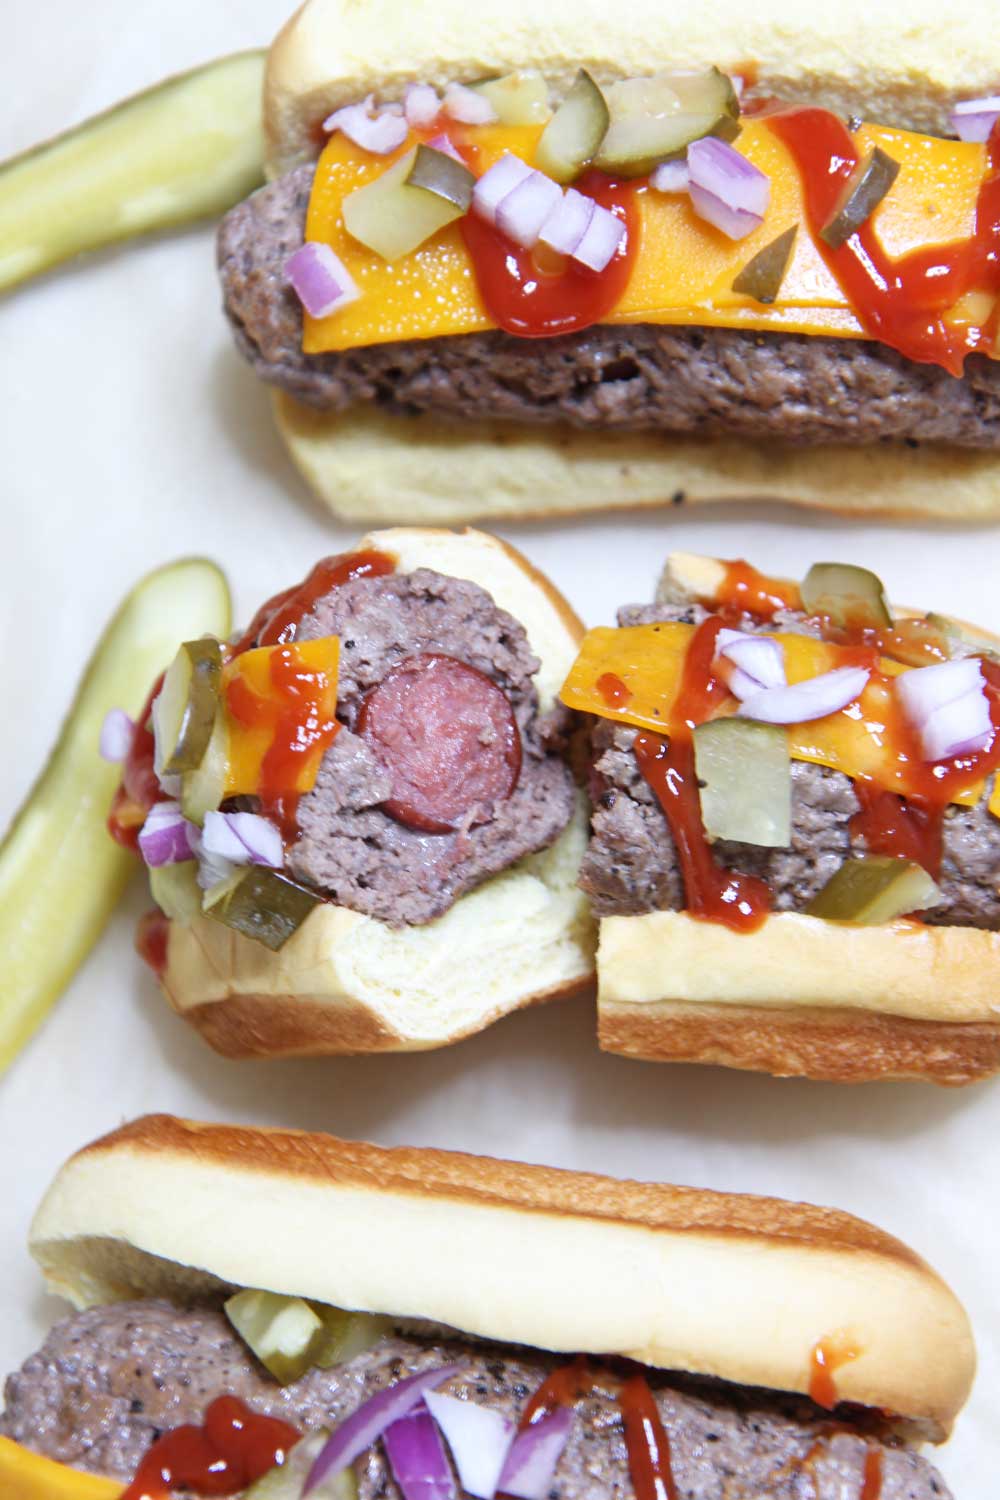 The Ultimate Burger Dog Food Hack. No more deciding weather to grill a hot dog or hamburger. This is a stuffed burger with a hot dog in the middle. Happy Grilling! #hotdog #foodhack